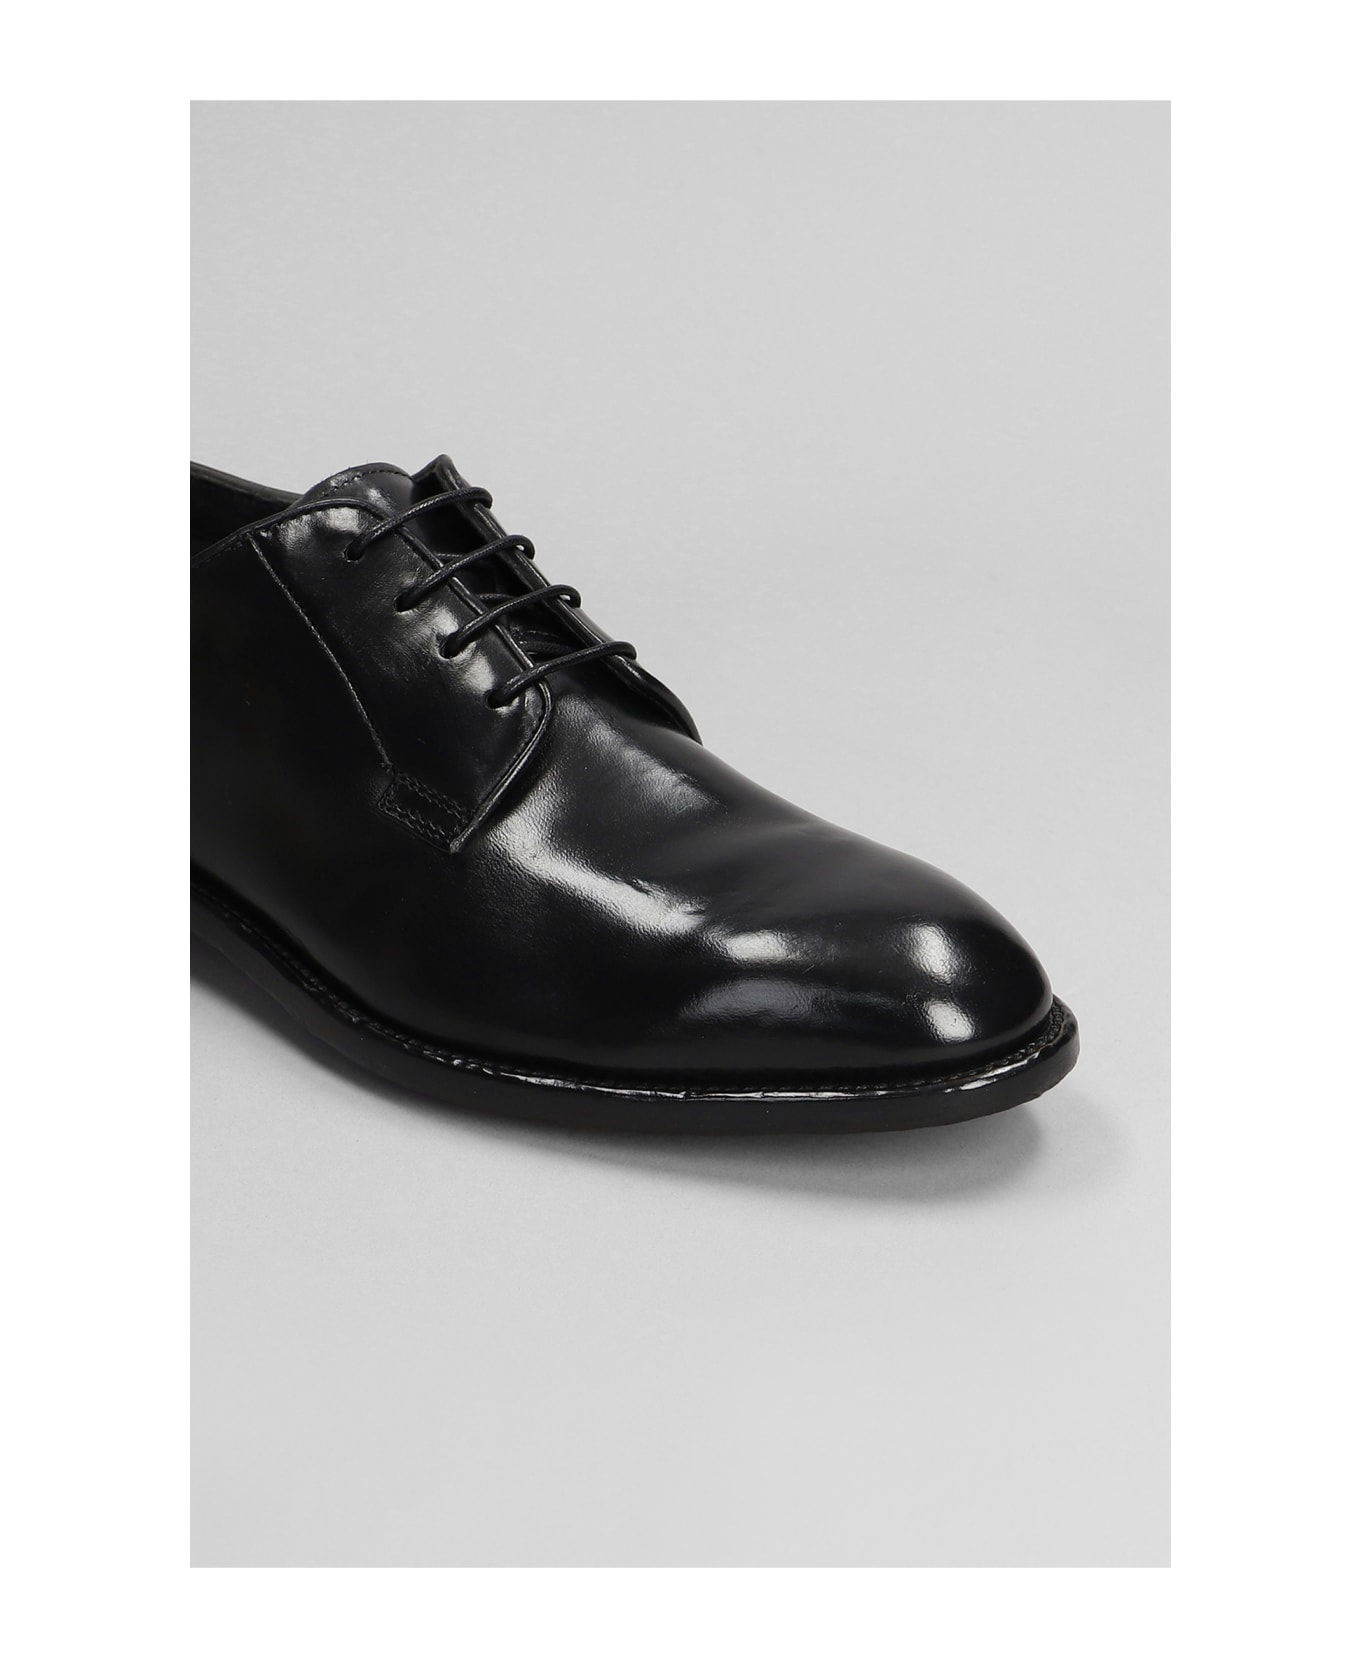 Officine Creative Signature 001 Lace Up Shoes In Black Leather - black